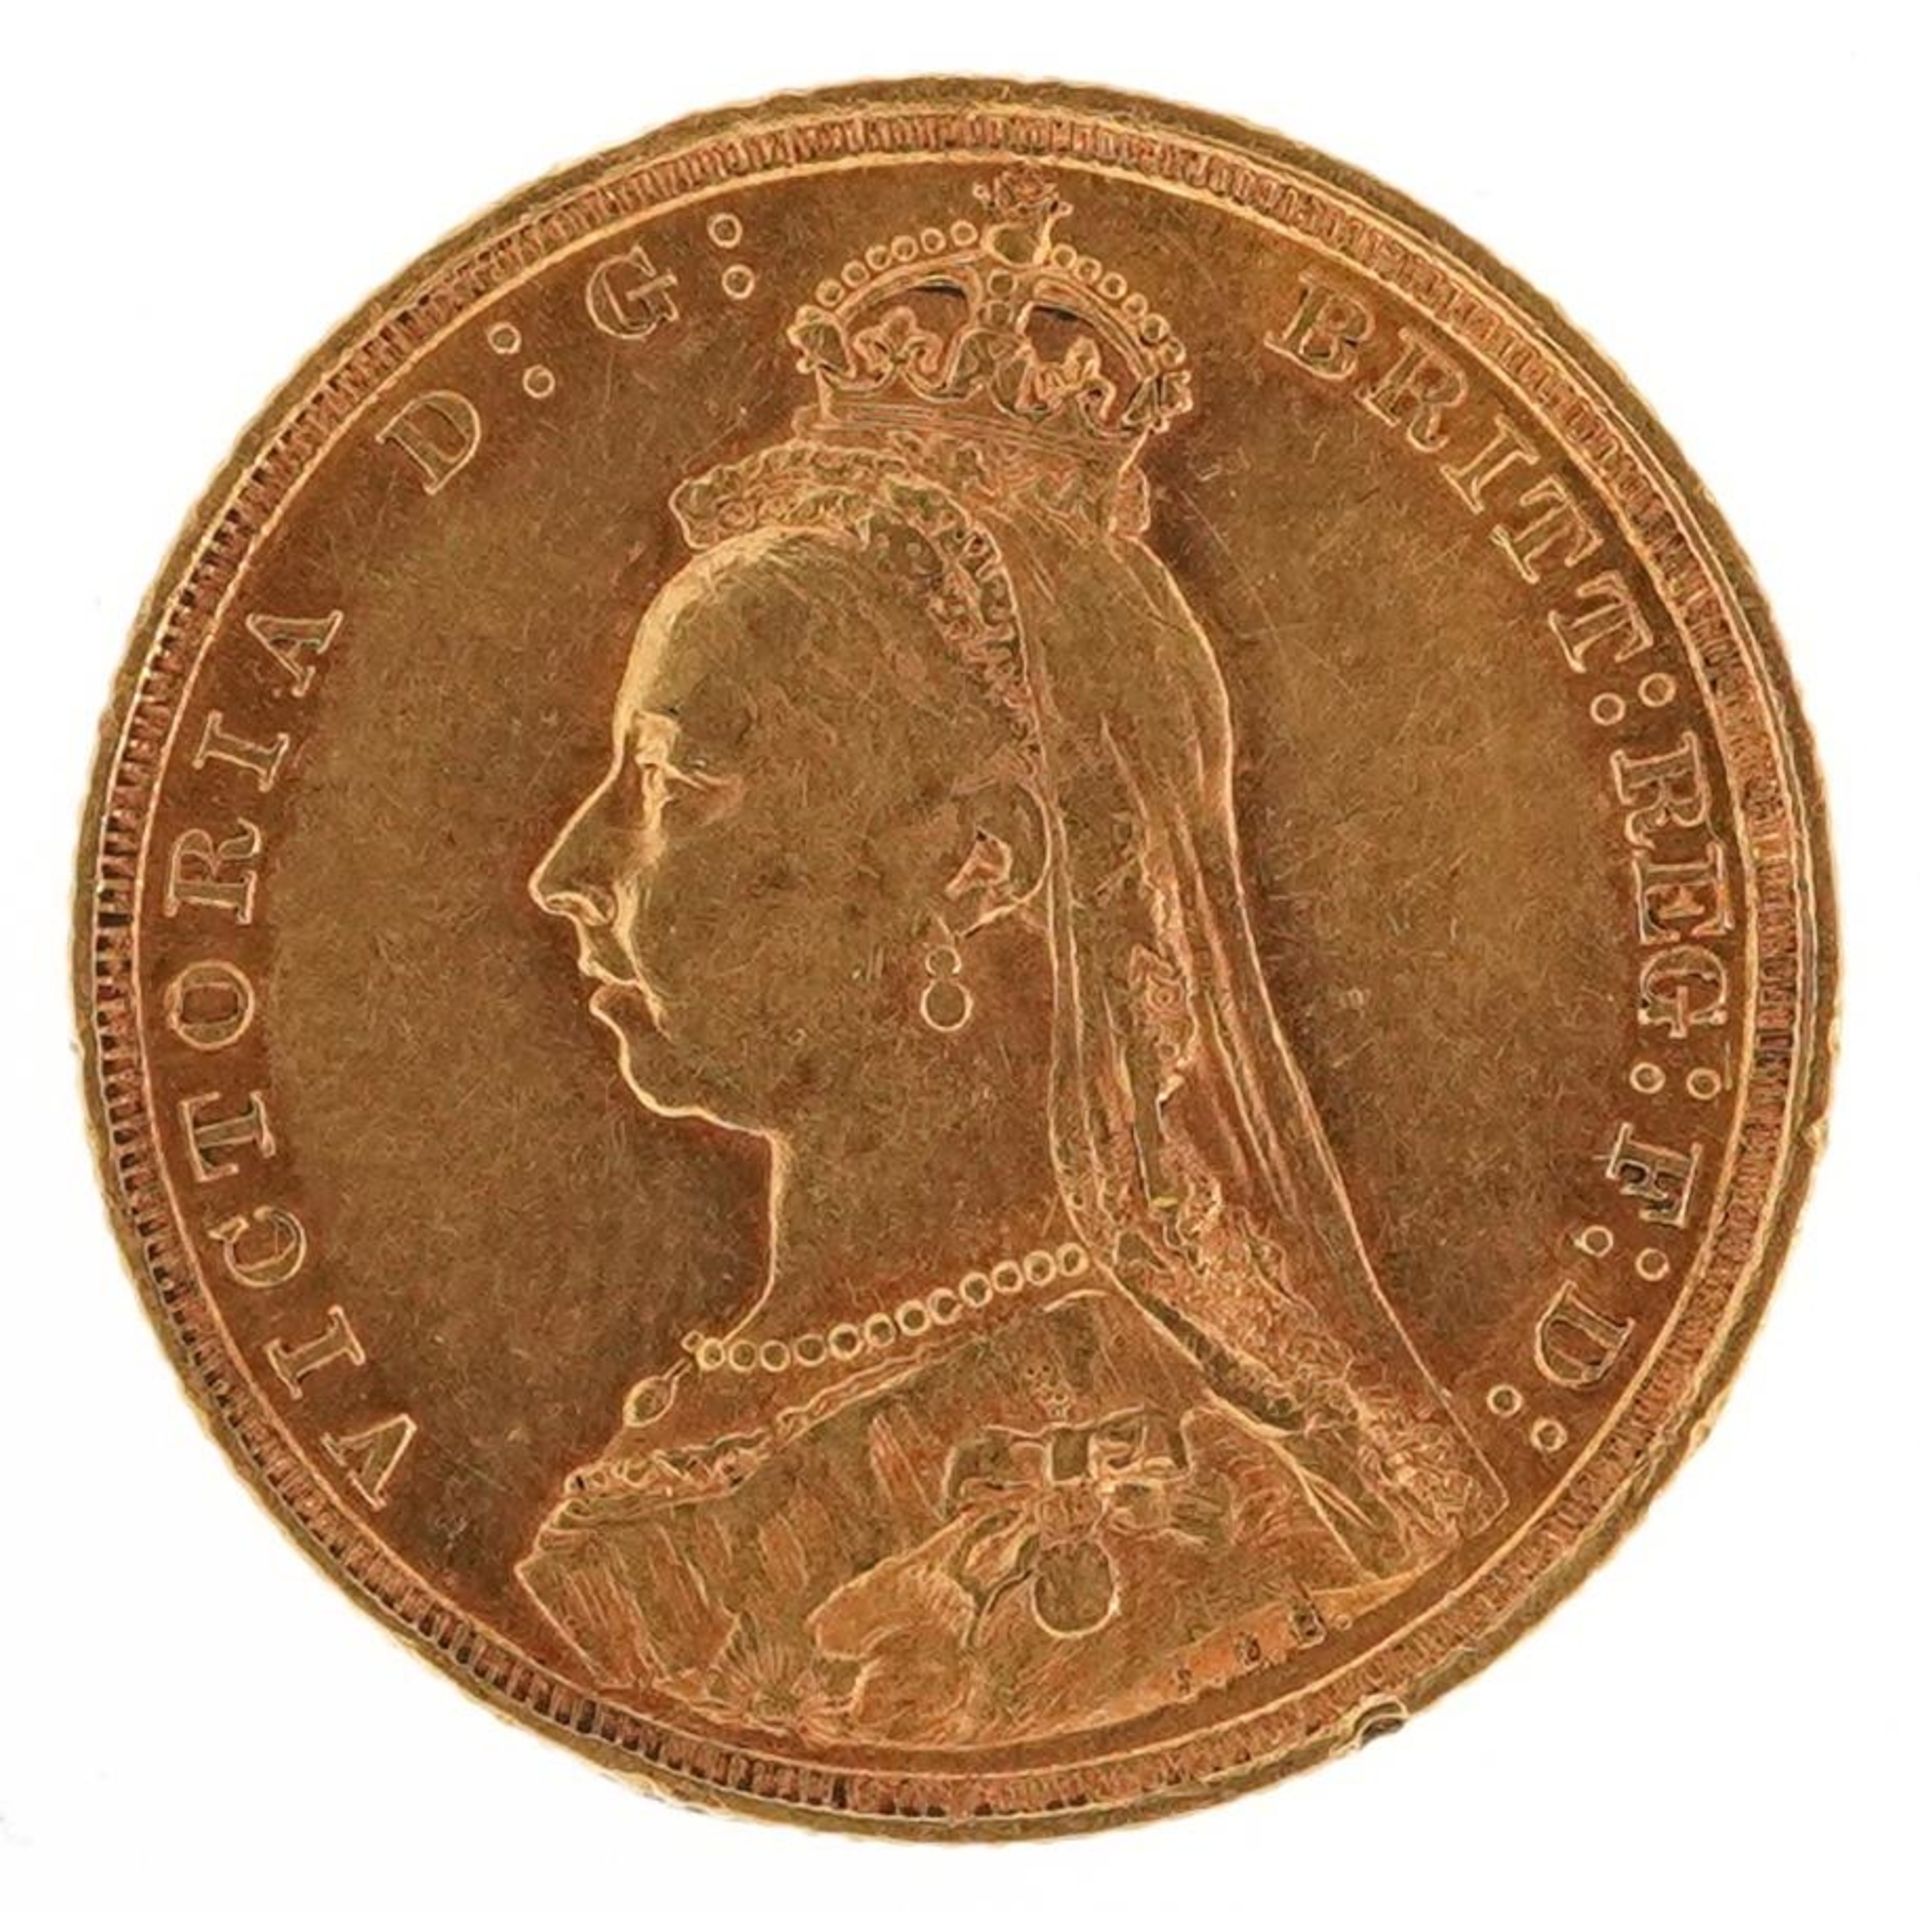 Queen Victorian Jubilee Head 1889 gold sovereign, Sydney Mint - Image 2 of 3